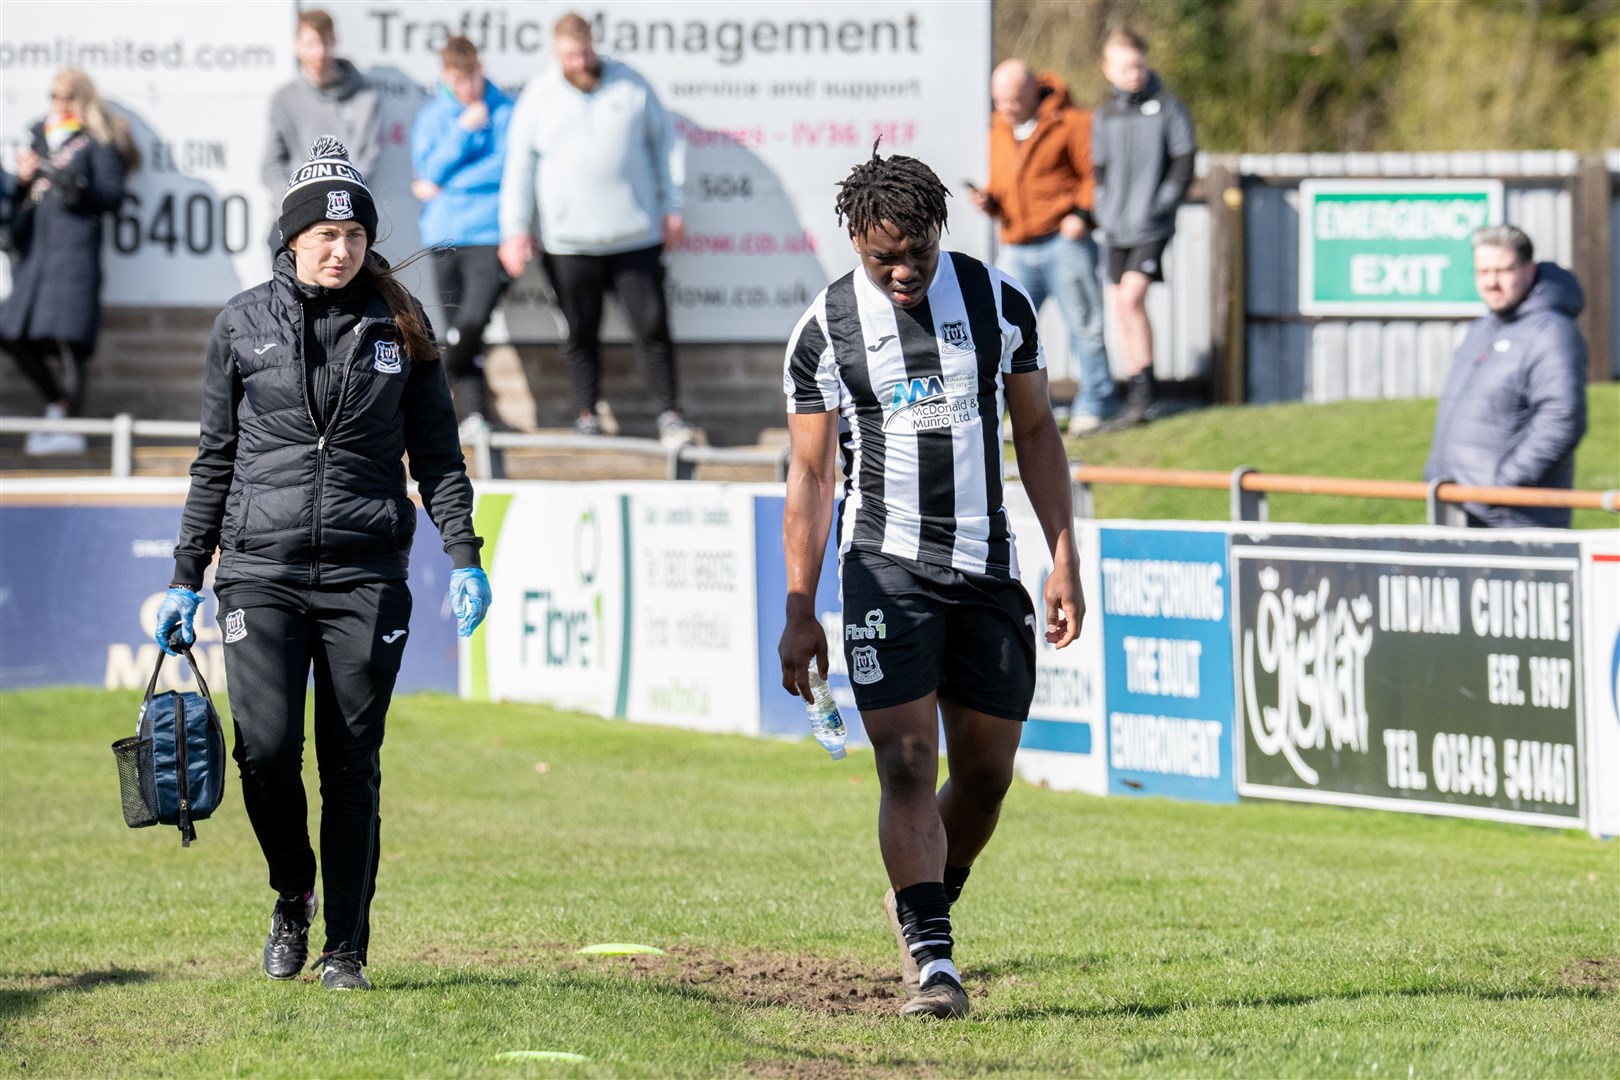 Another injury woe for Elgin City as Michael Dangana comes off in the first half. Elgin City FC (2) vs The Spartans (2) - SPFL League Two 23/24 - Borough Briggs, Elgin 06/04/24.Picture: Daniel Forsyth.